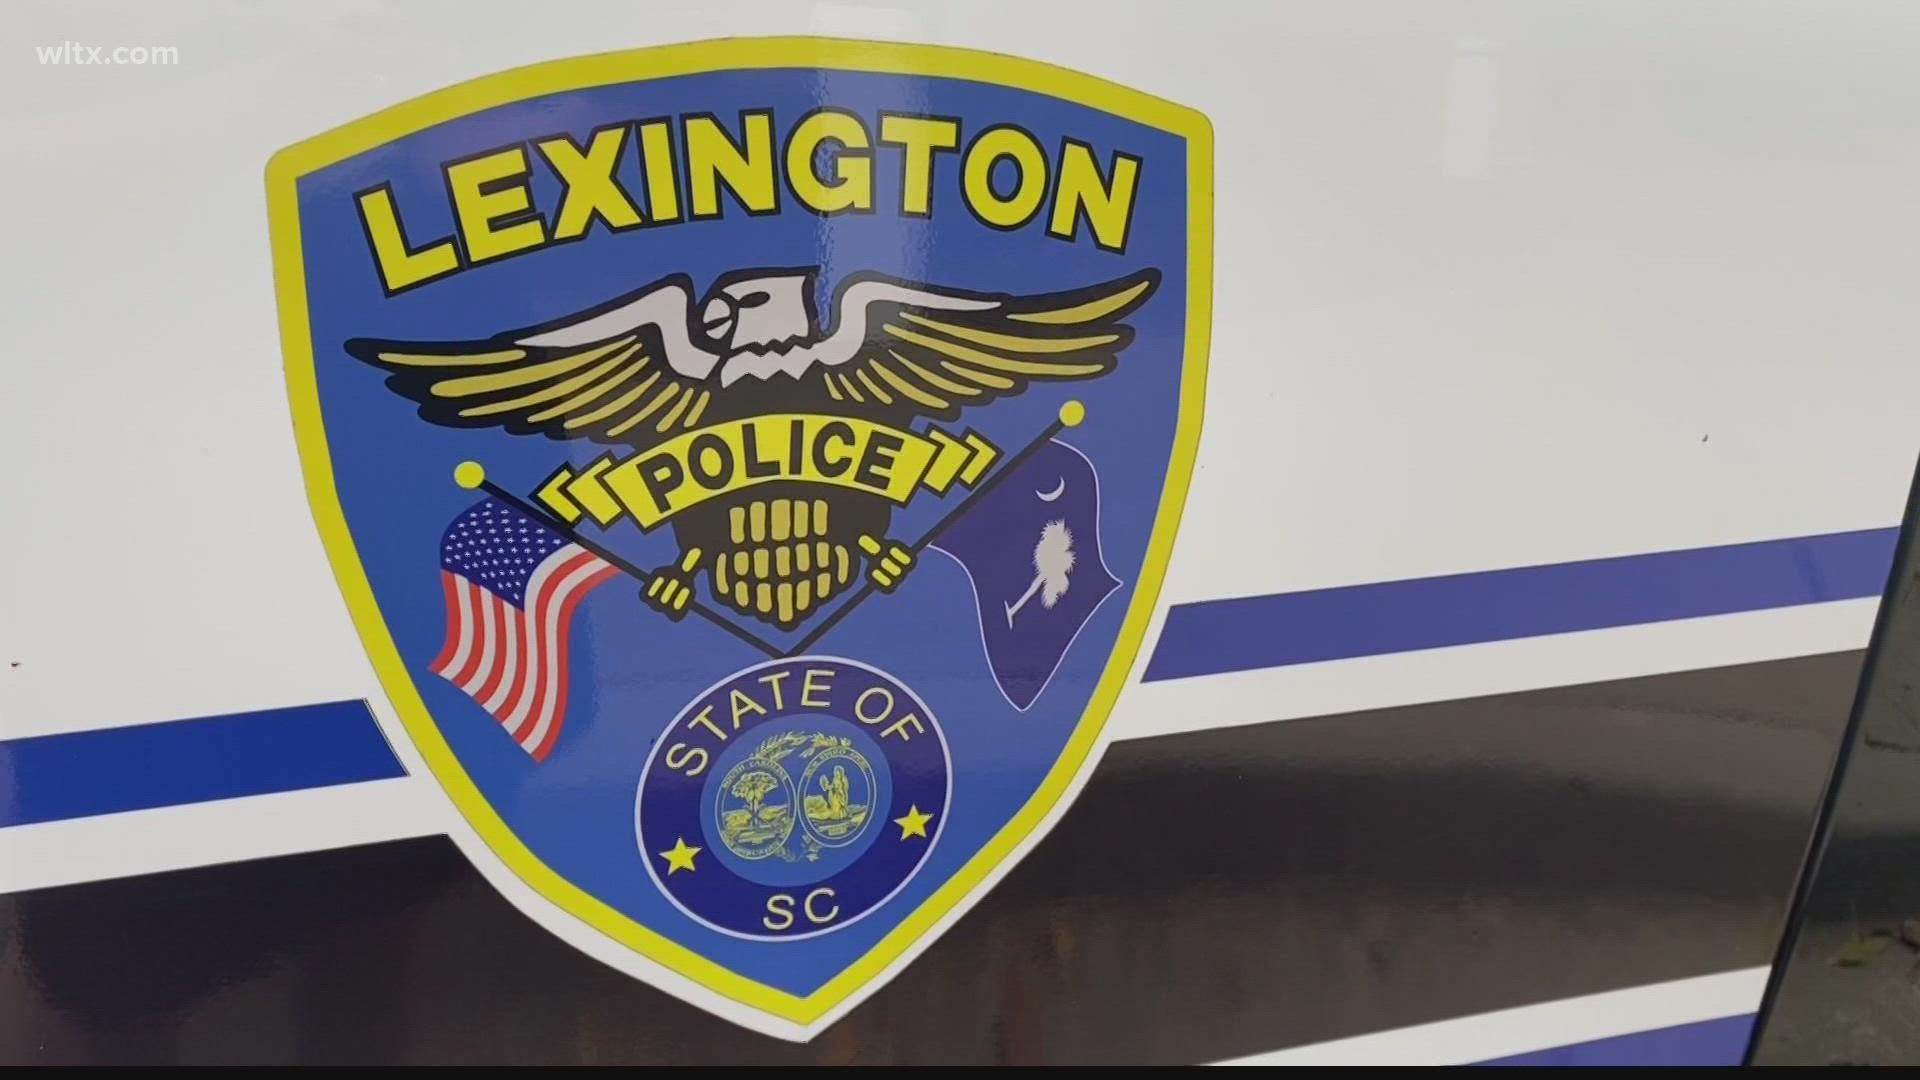 Lexington town leaders hope to enticing more police officers to help out while off duty by possibly increasing the pay for working special events.